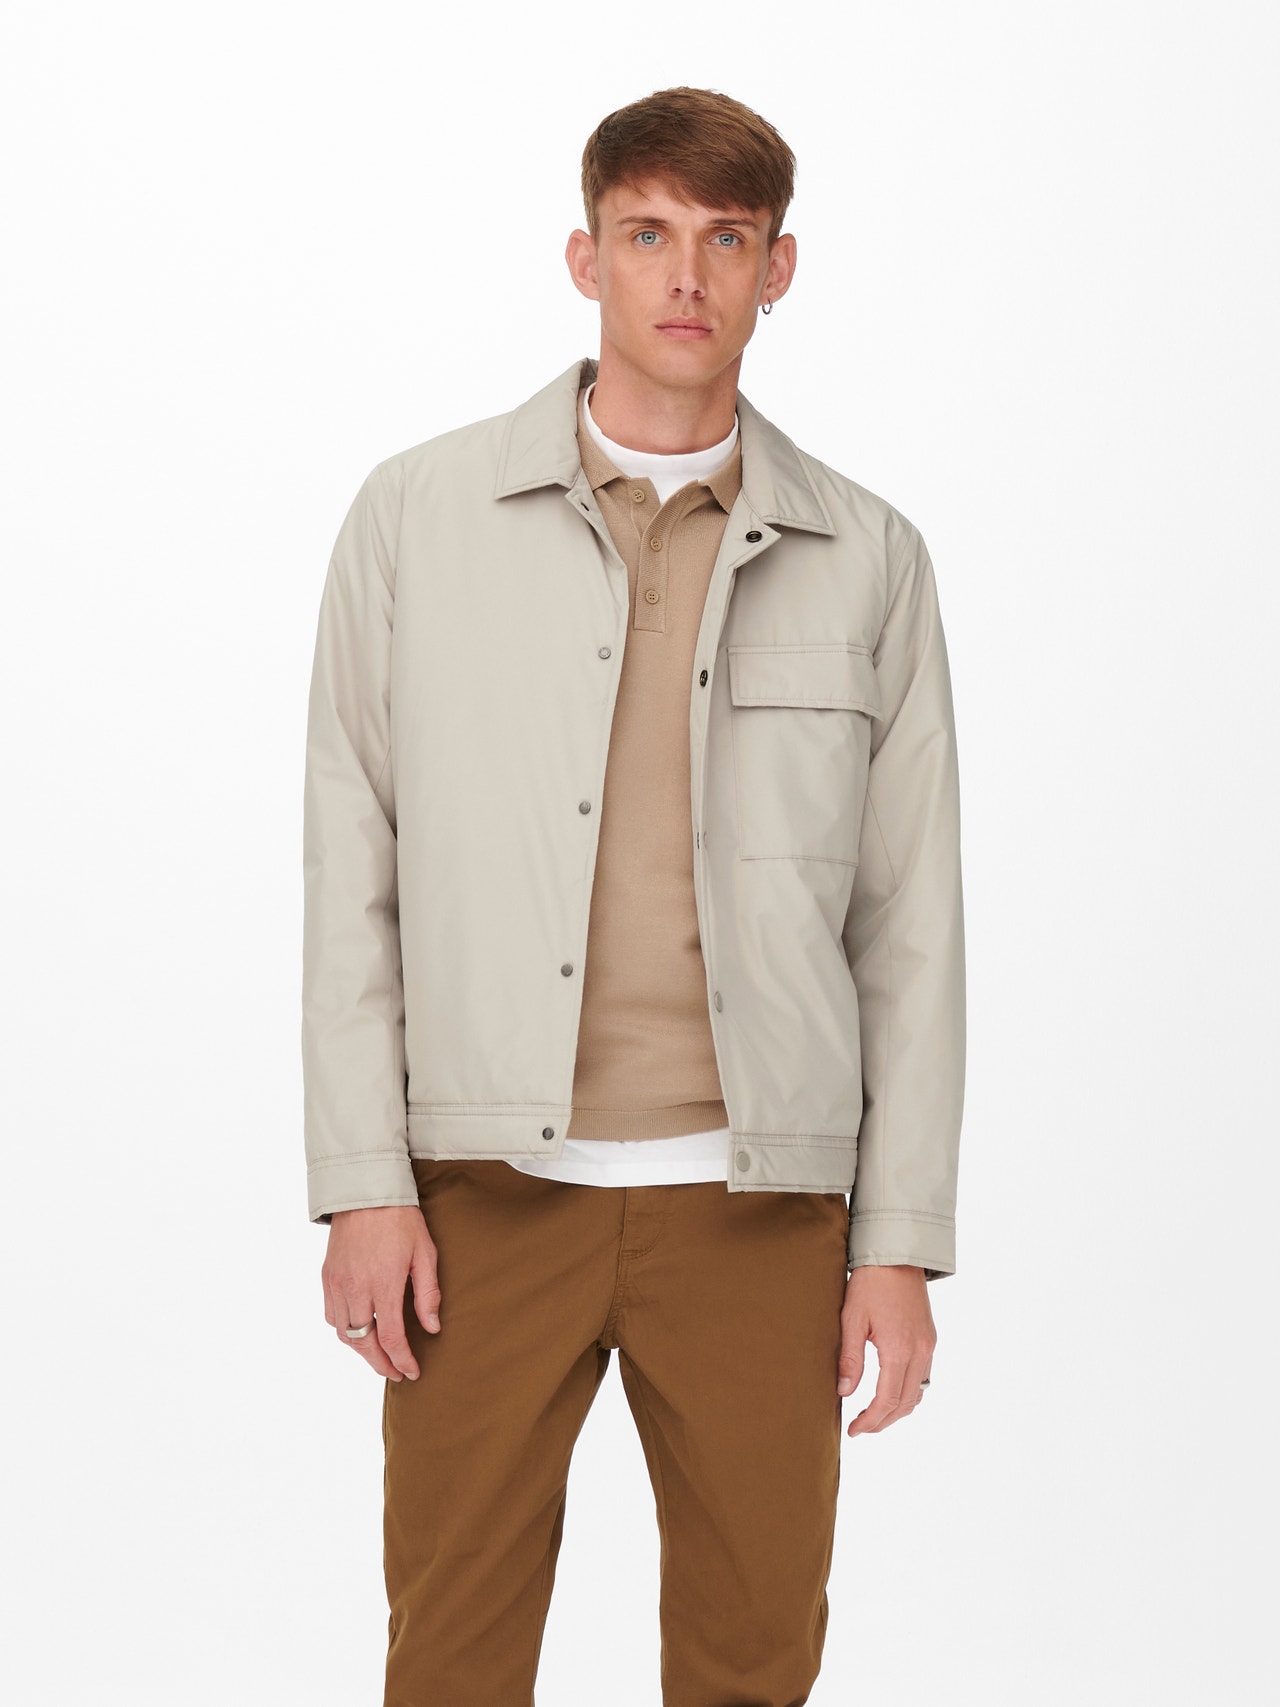 ONLY & SONS Jacket -Silver Lining - 22022462